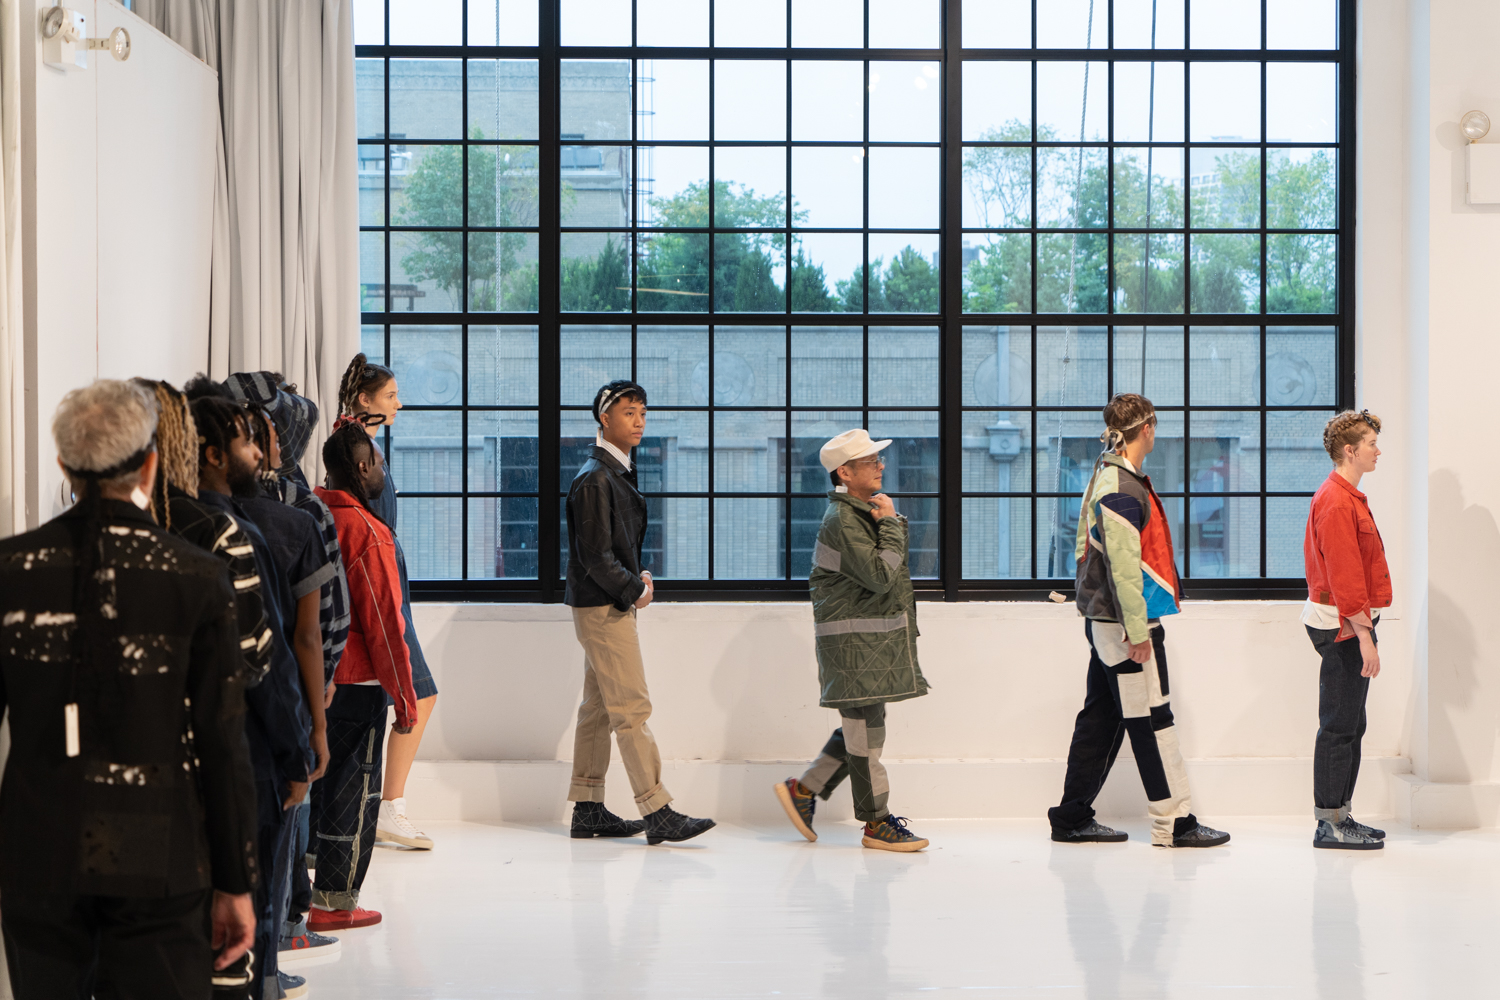 A line of models walks across a fashion showroom with white walls and floors. They are wearing clothing from the brand Raleigh Workshop.